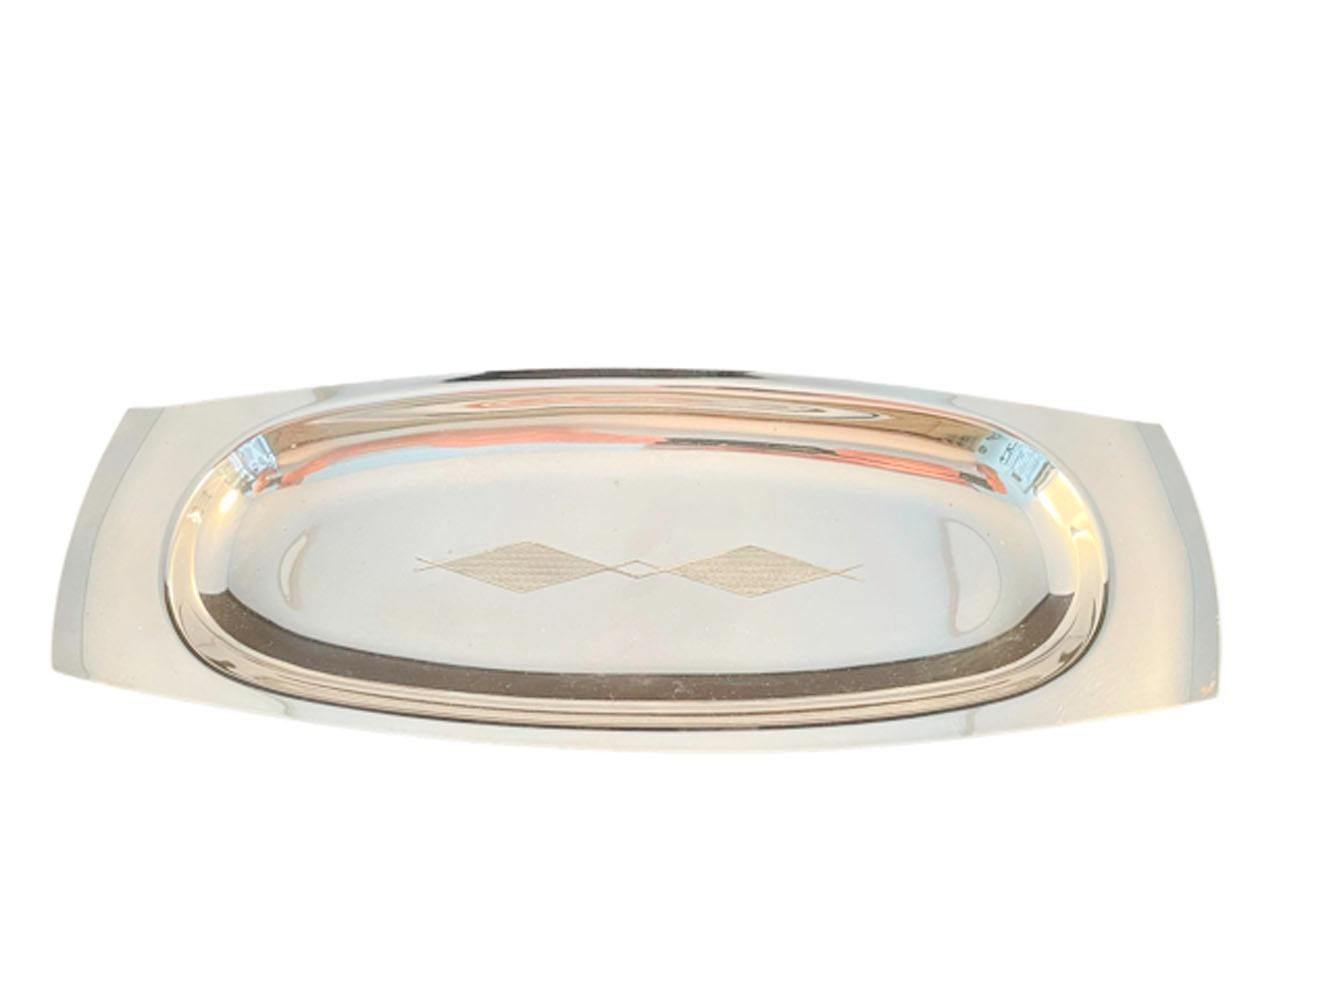 Art Deco Silver Plate Hors D' Oeuvres Tray In Good Condition For Sale In Nantucket, MA